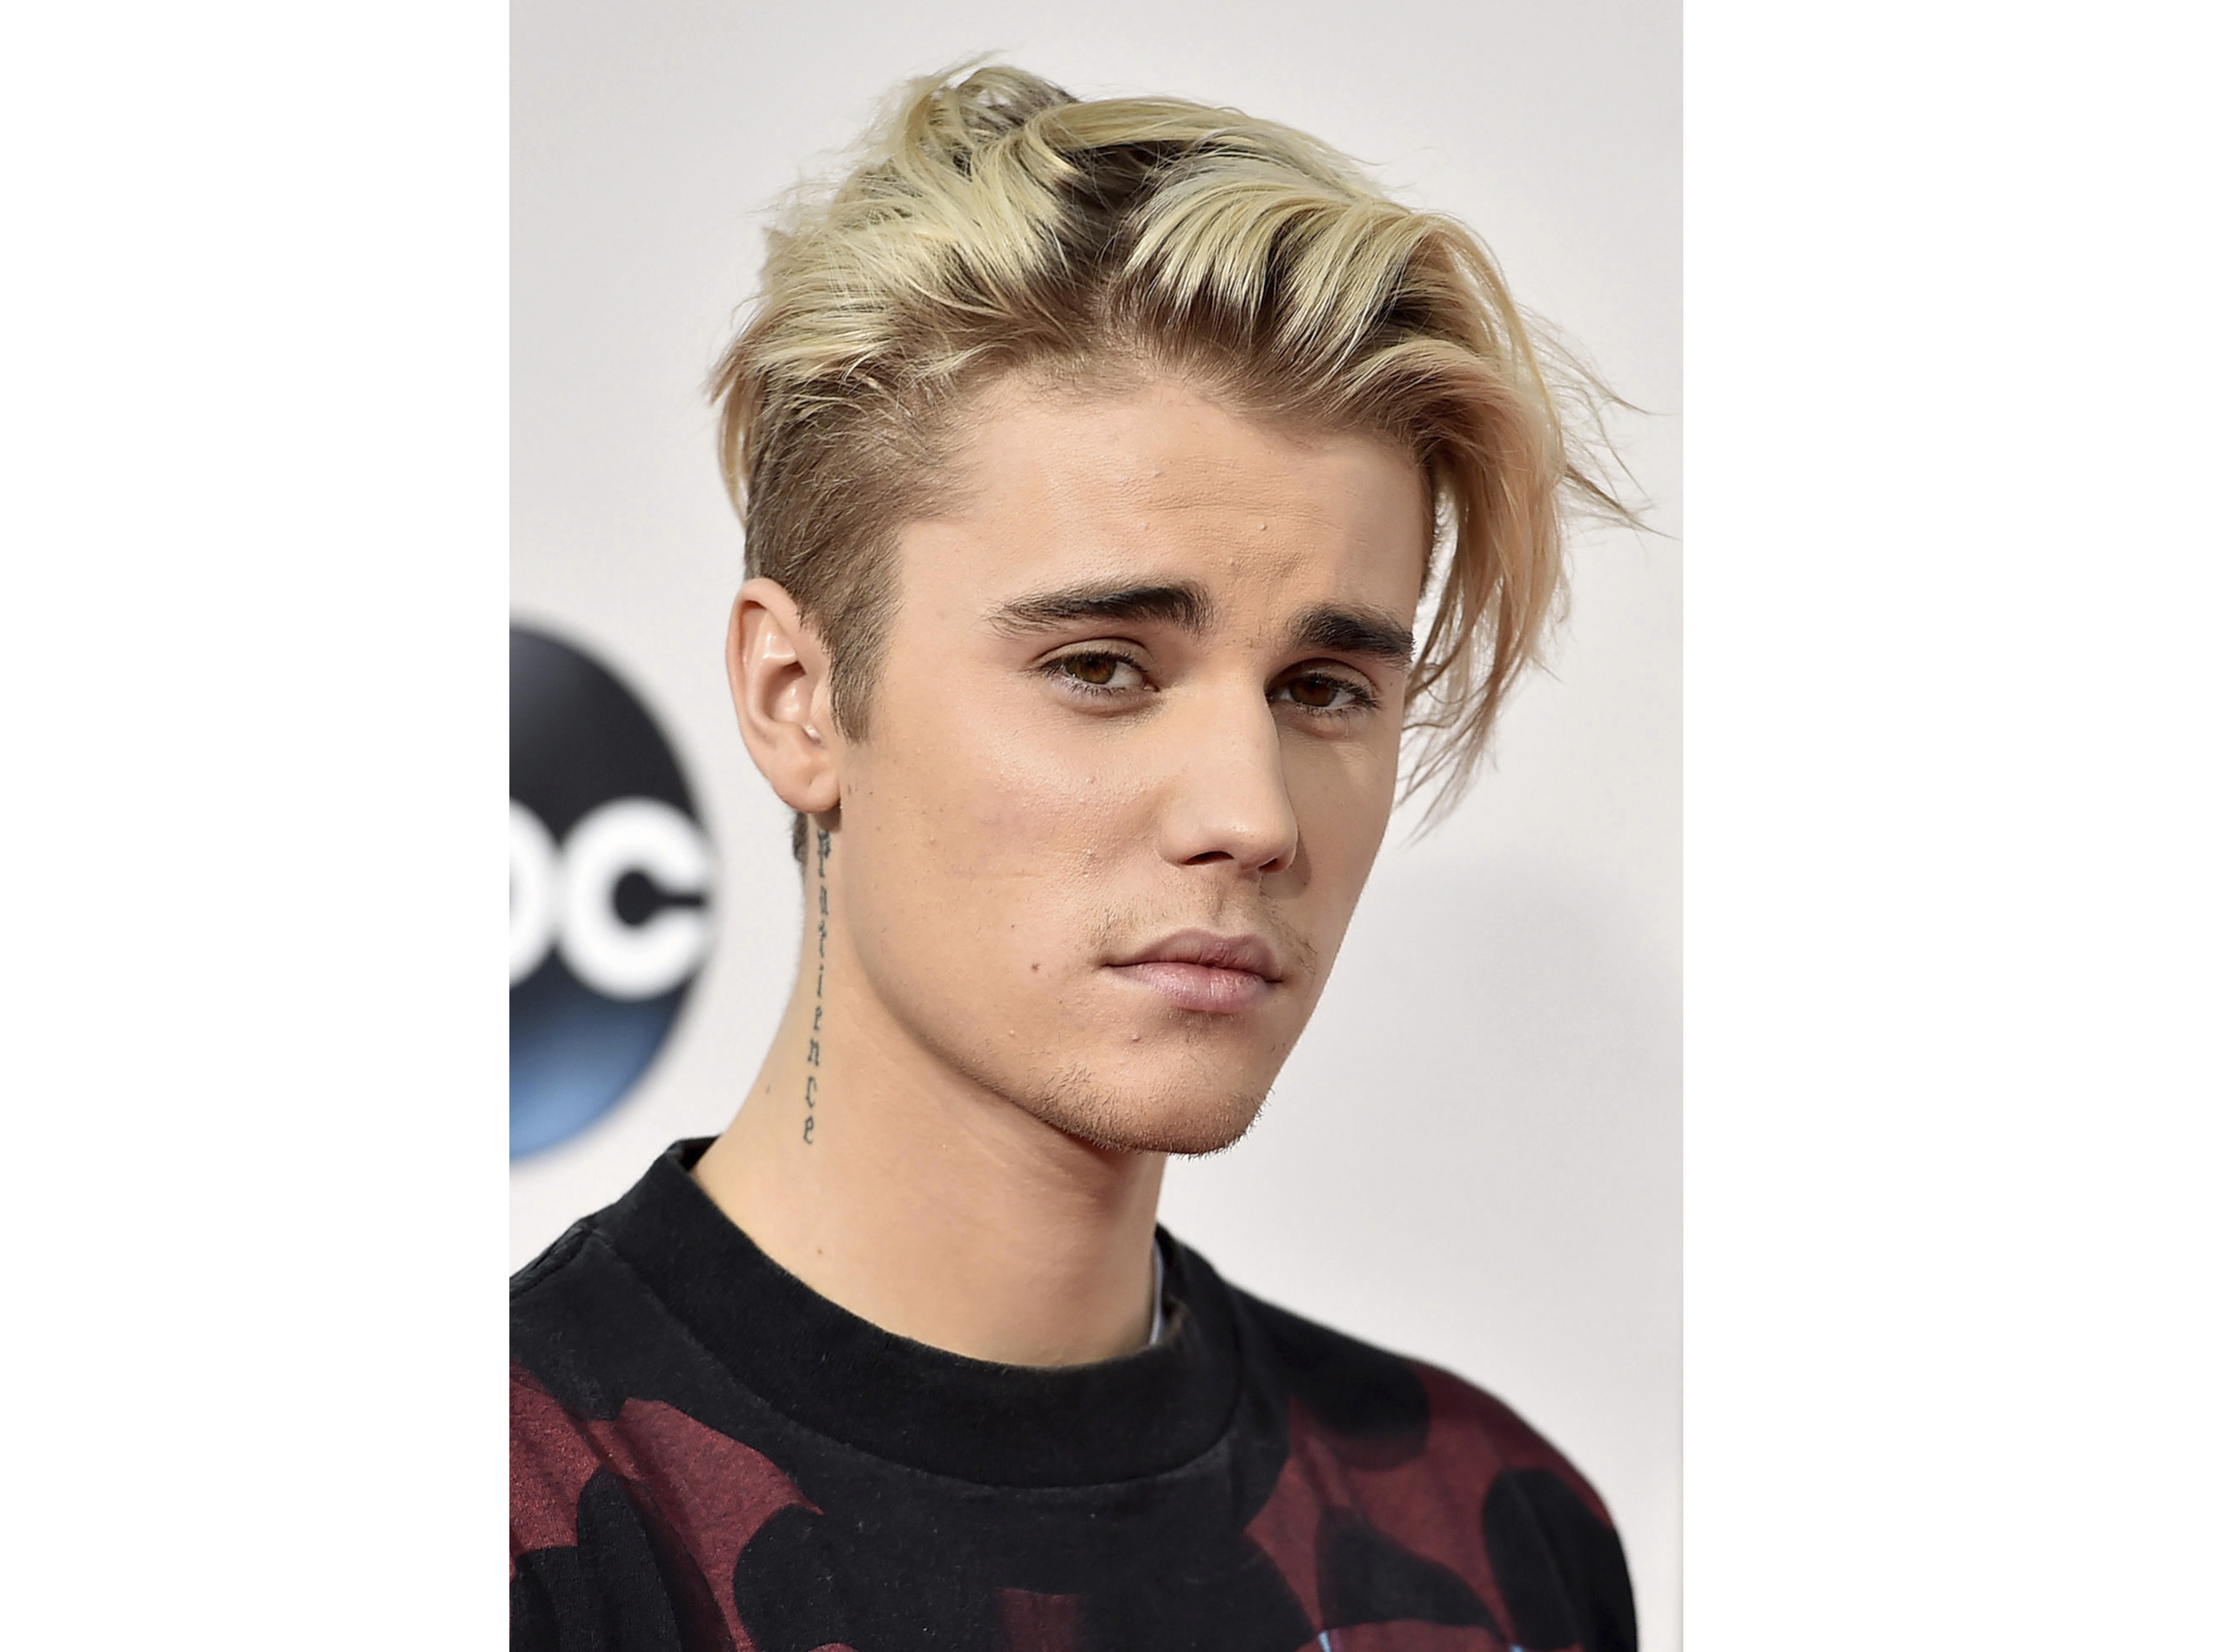 FILE - This Nov. 22, 2015 file photo shows Justin Bieber at the American Music Awards in Los Angeles. Bieber says that he has been battling Lyme disease. In an Instagram post on Wednesday, Jan. 8, 2020, the pop star wrote that “it’s been a rough couple years but (I’m) getting the right treatment that will help treat this so far incurable disease and I will be back and better than ever.” Lyme disease is transmitted by Ixodes ticks, also known as deer ticks. Lyme can cause flu-like conditions, neurological problems, joint paint and other symptoms. (AP Photo by Jordan Strauss/Invision/AP)